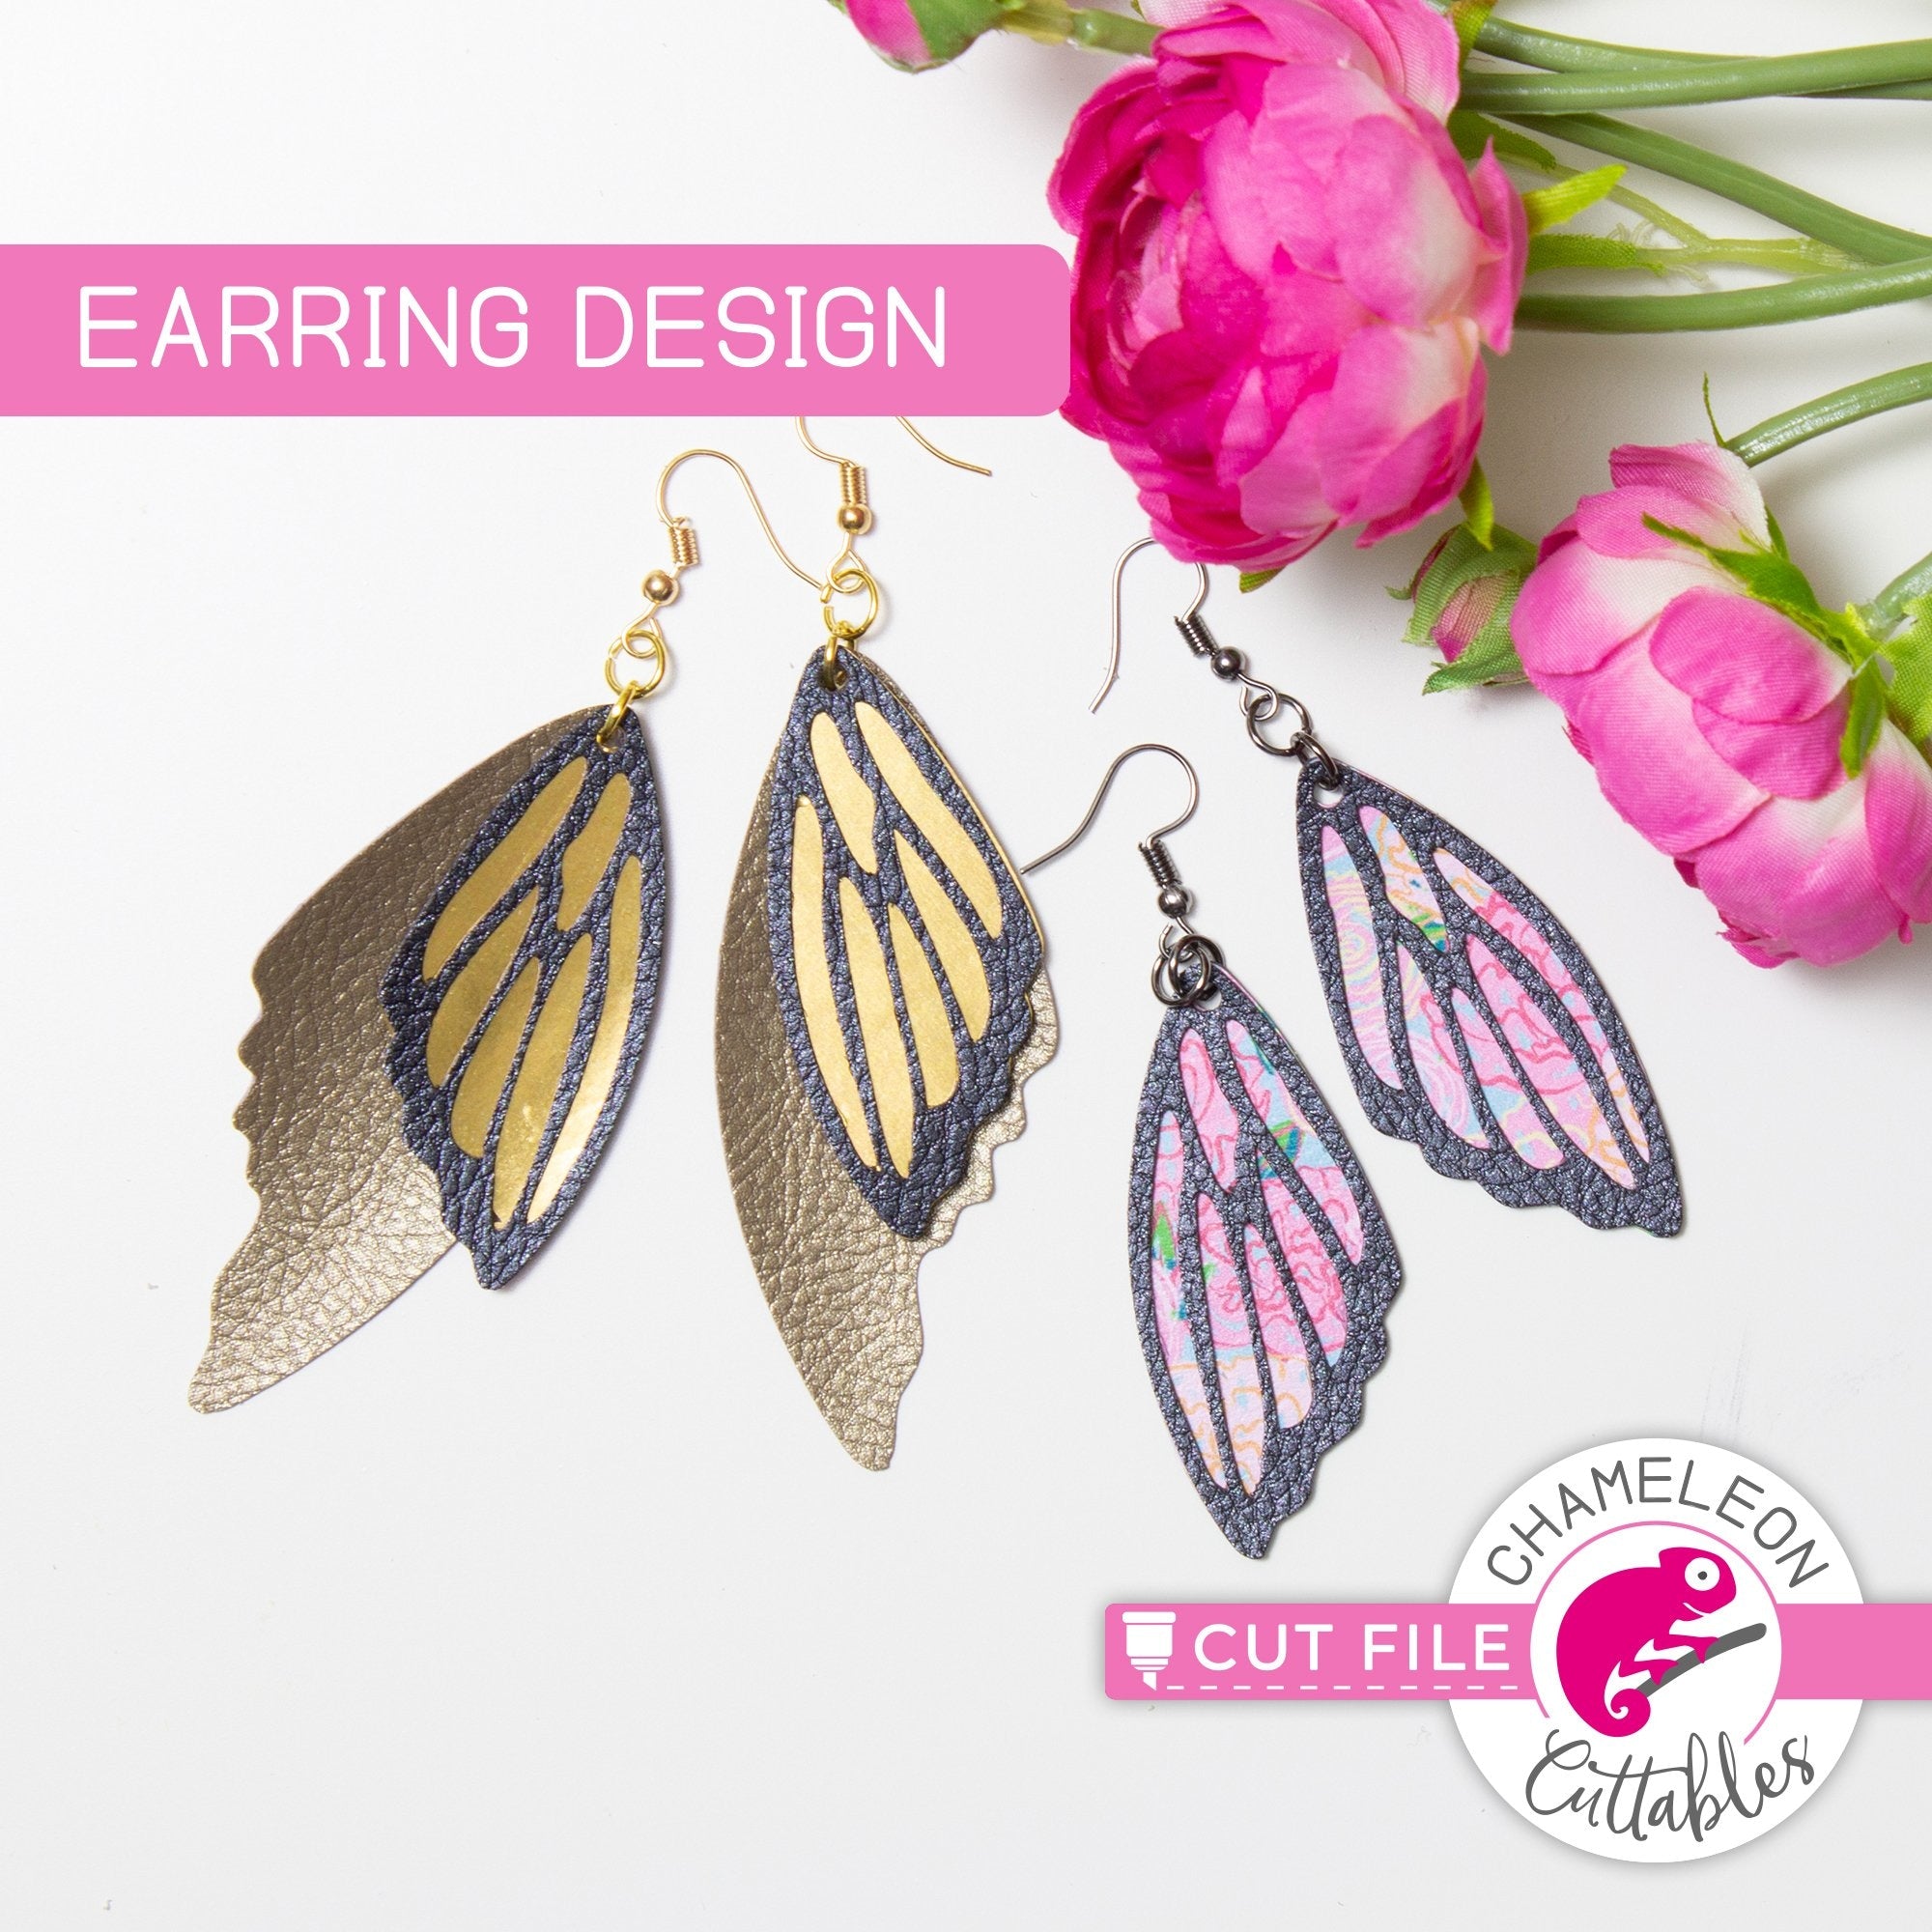 Download Butterfly Wings Earring Template Svg Png Dxf Eps Chameleon Cuttables Llc Chameleon Cuttables Llc